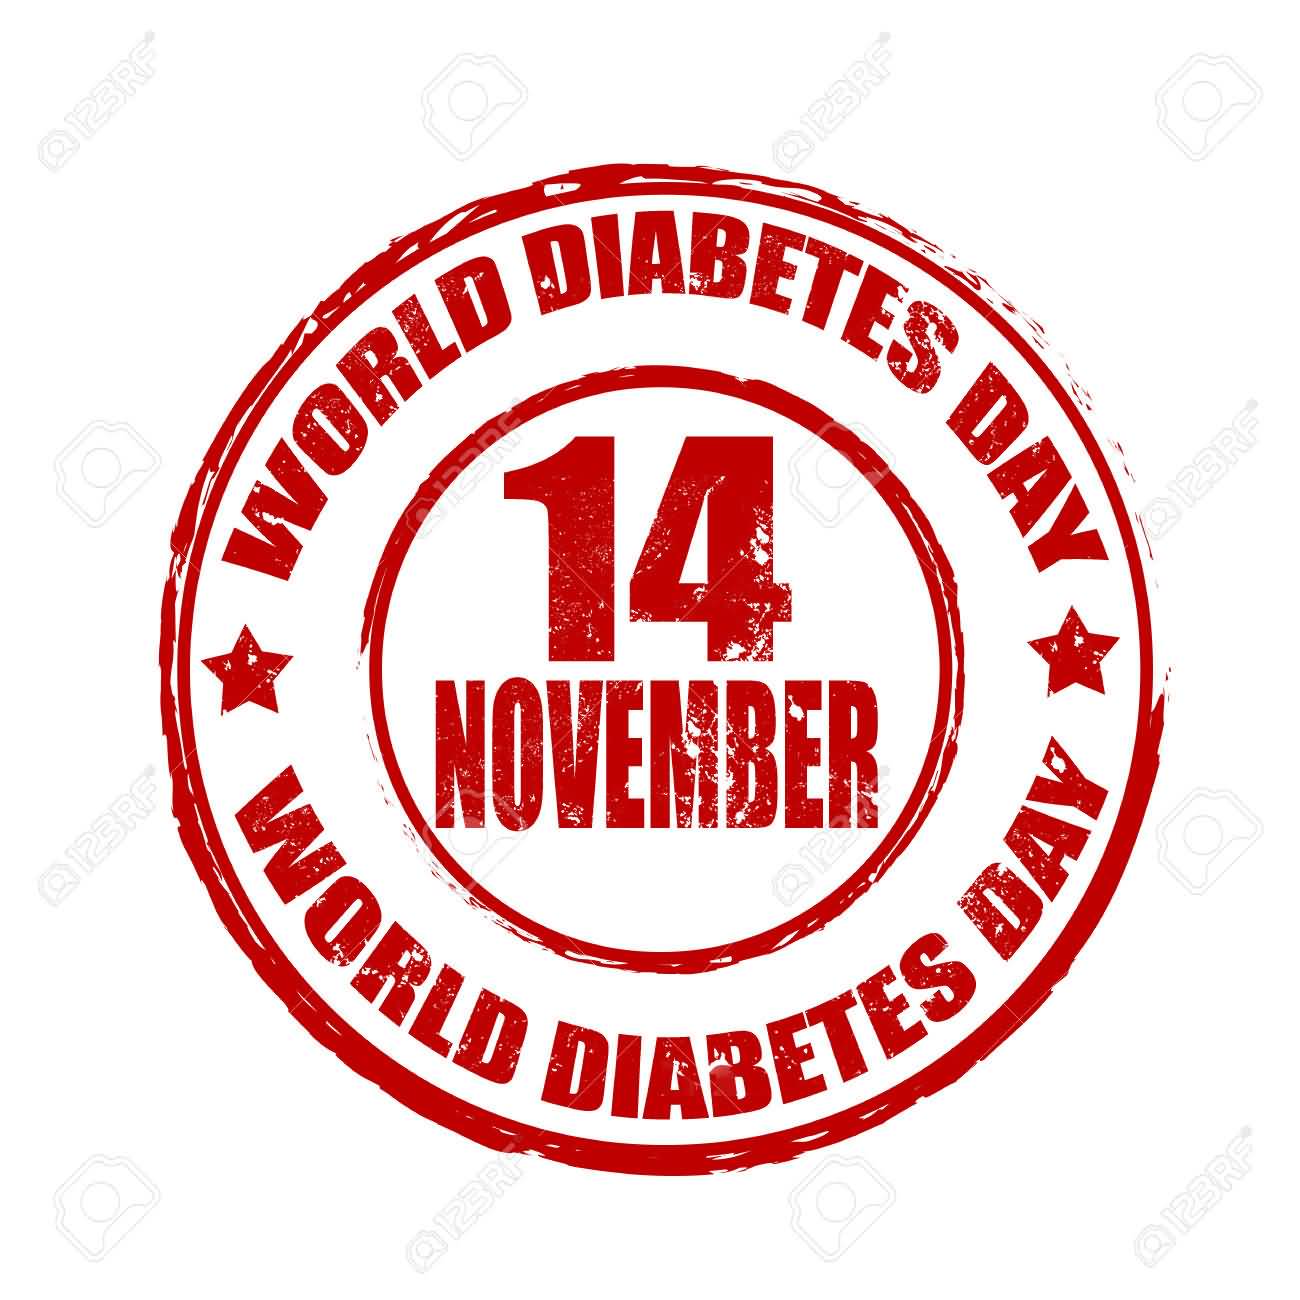 World Diabetes Day 14 November Rubber Stamp Picture